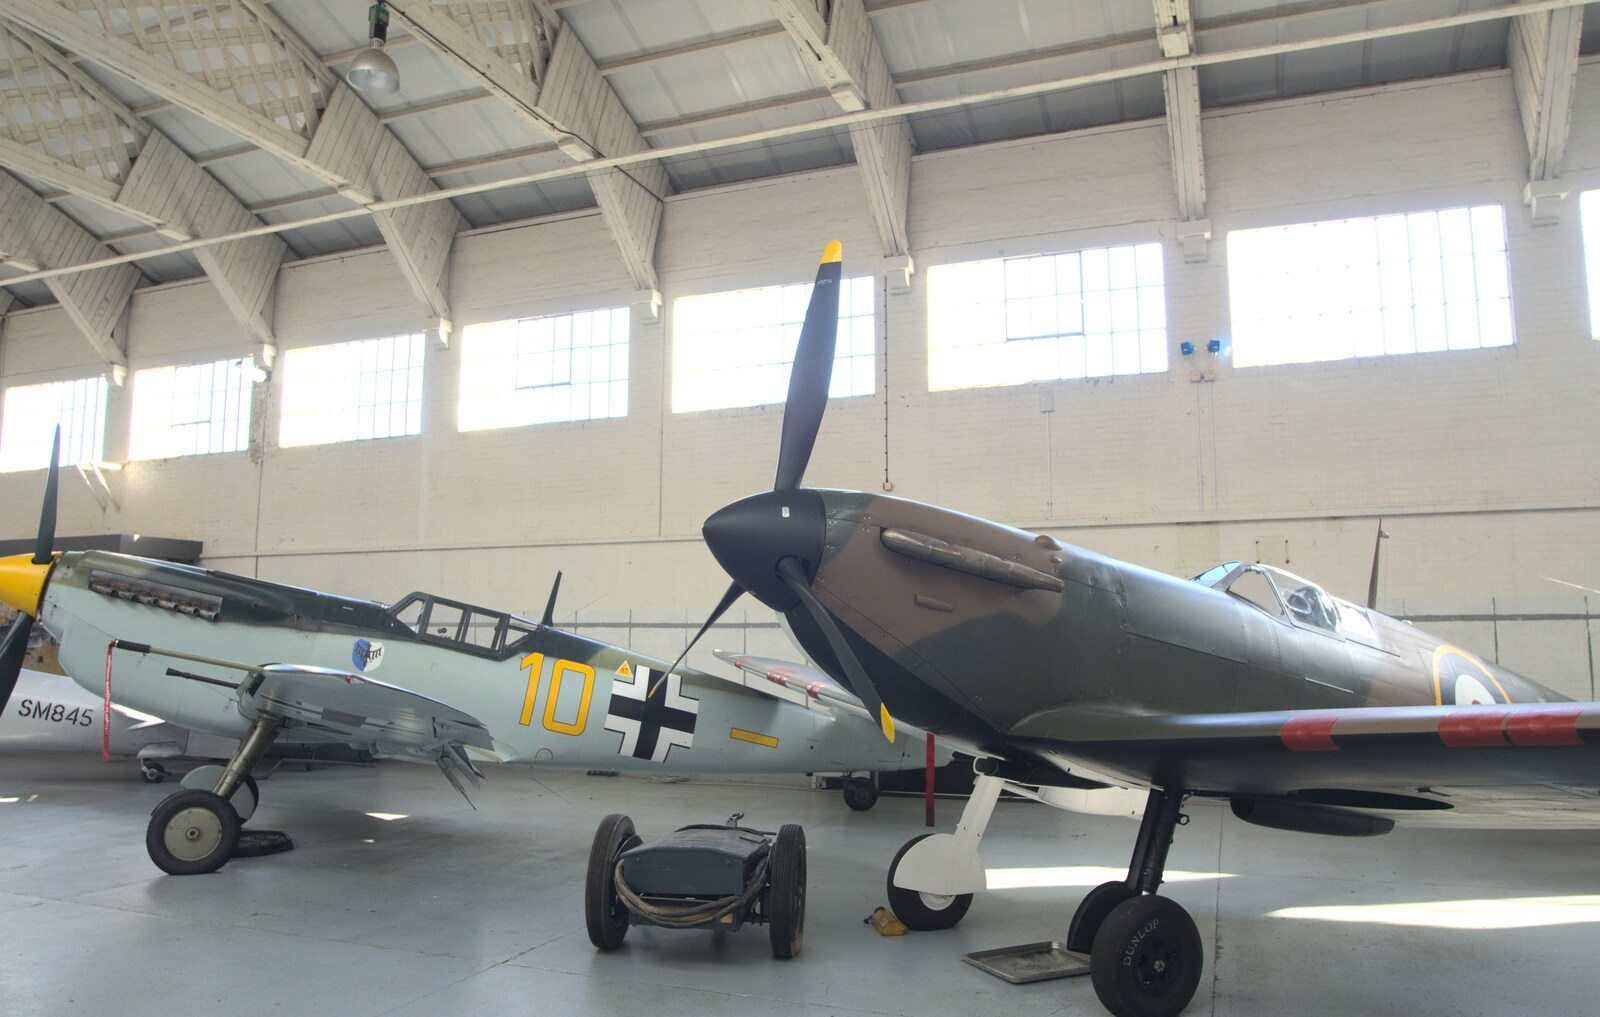 Messerschmitt and Spitfire from A Day Out at Duxford, Cambridgeshire - 9th March 2014